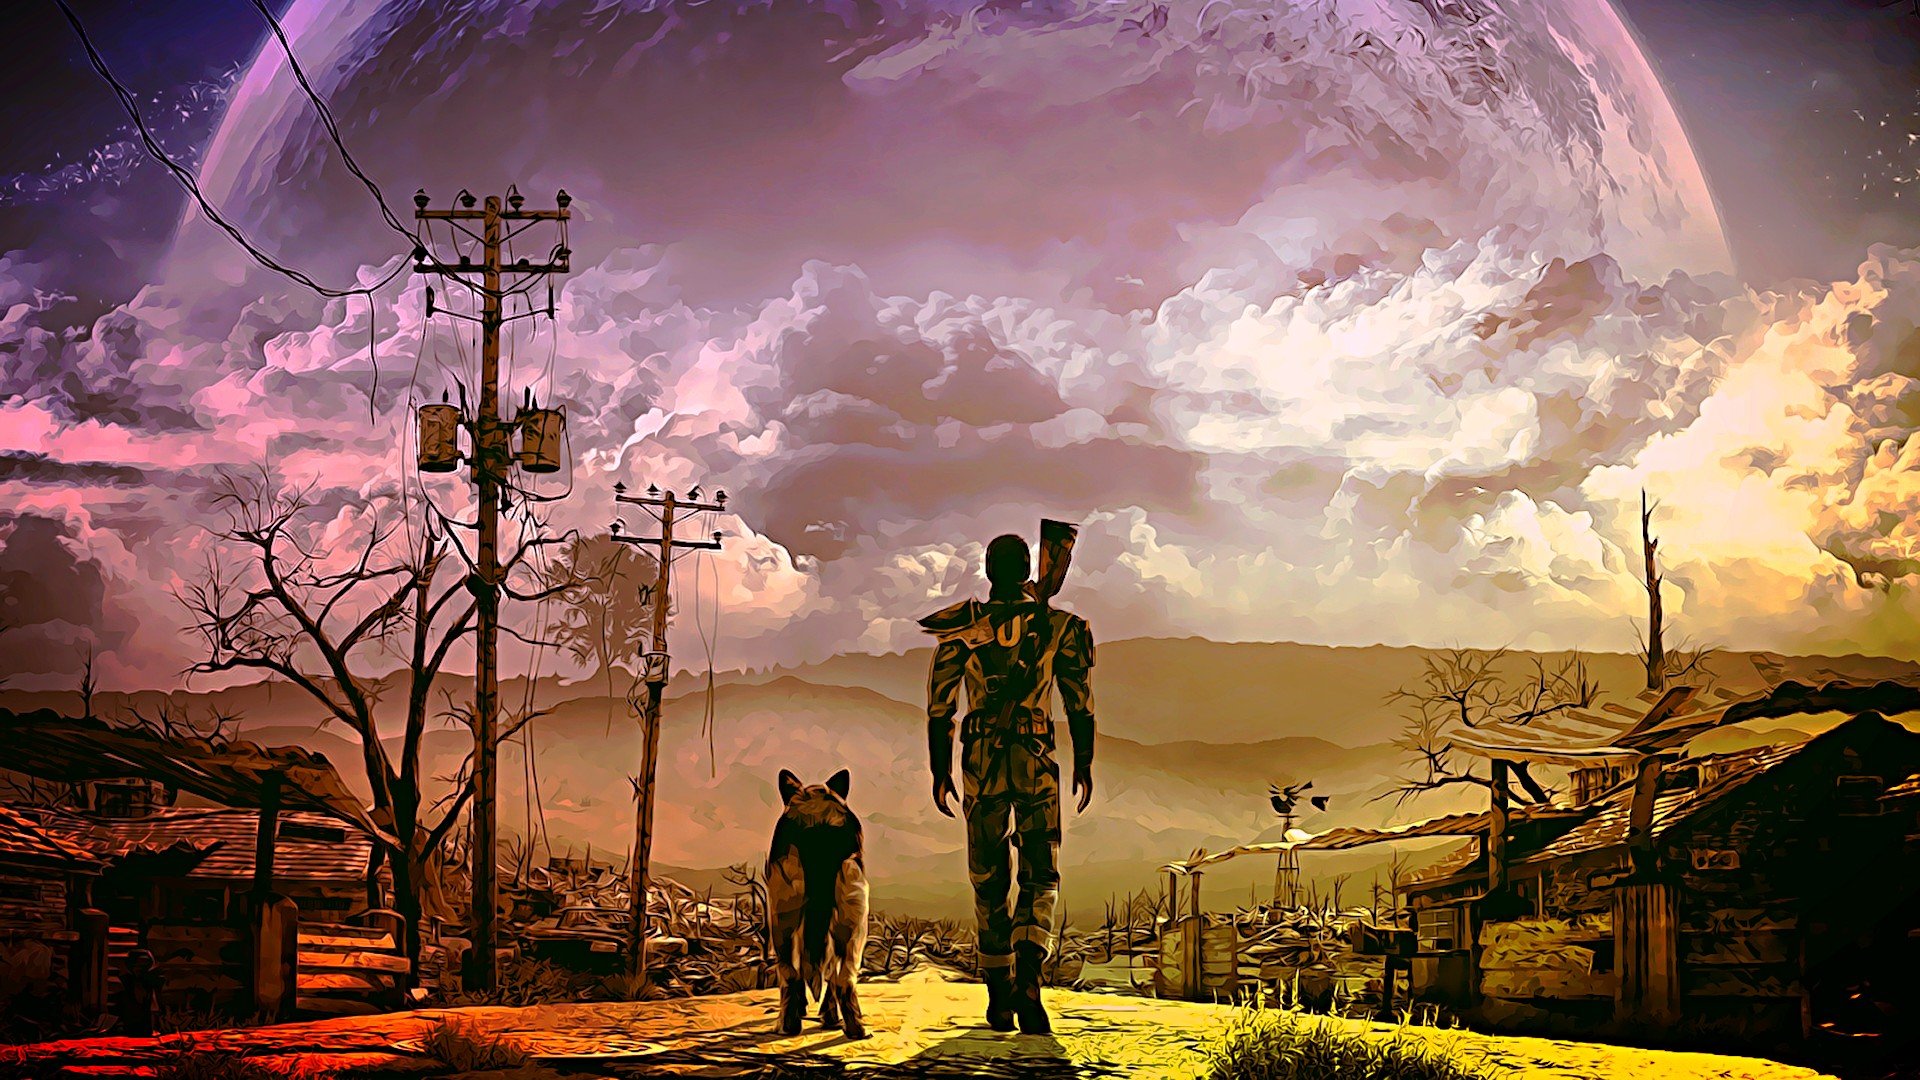 Details more than 88 fallout 4 wallpapers best - in.coedo.com.vn